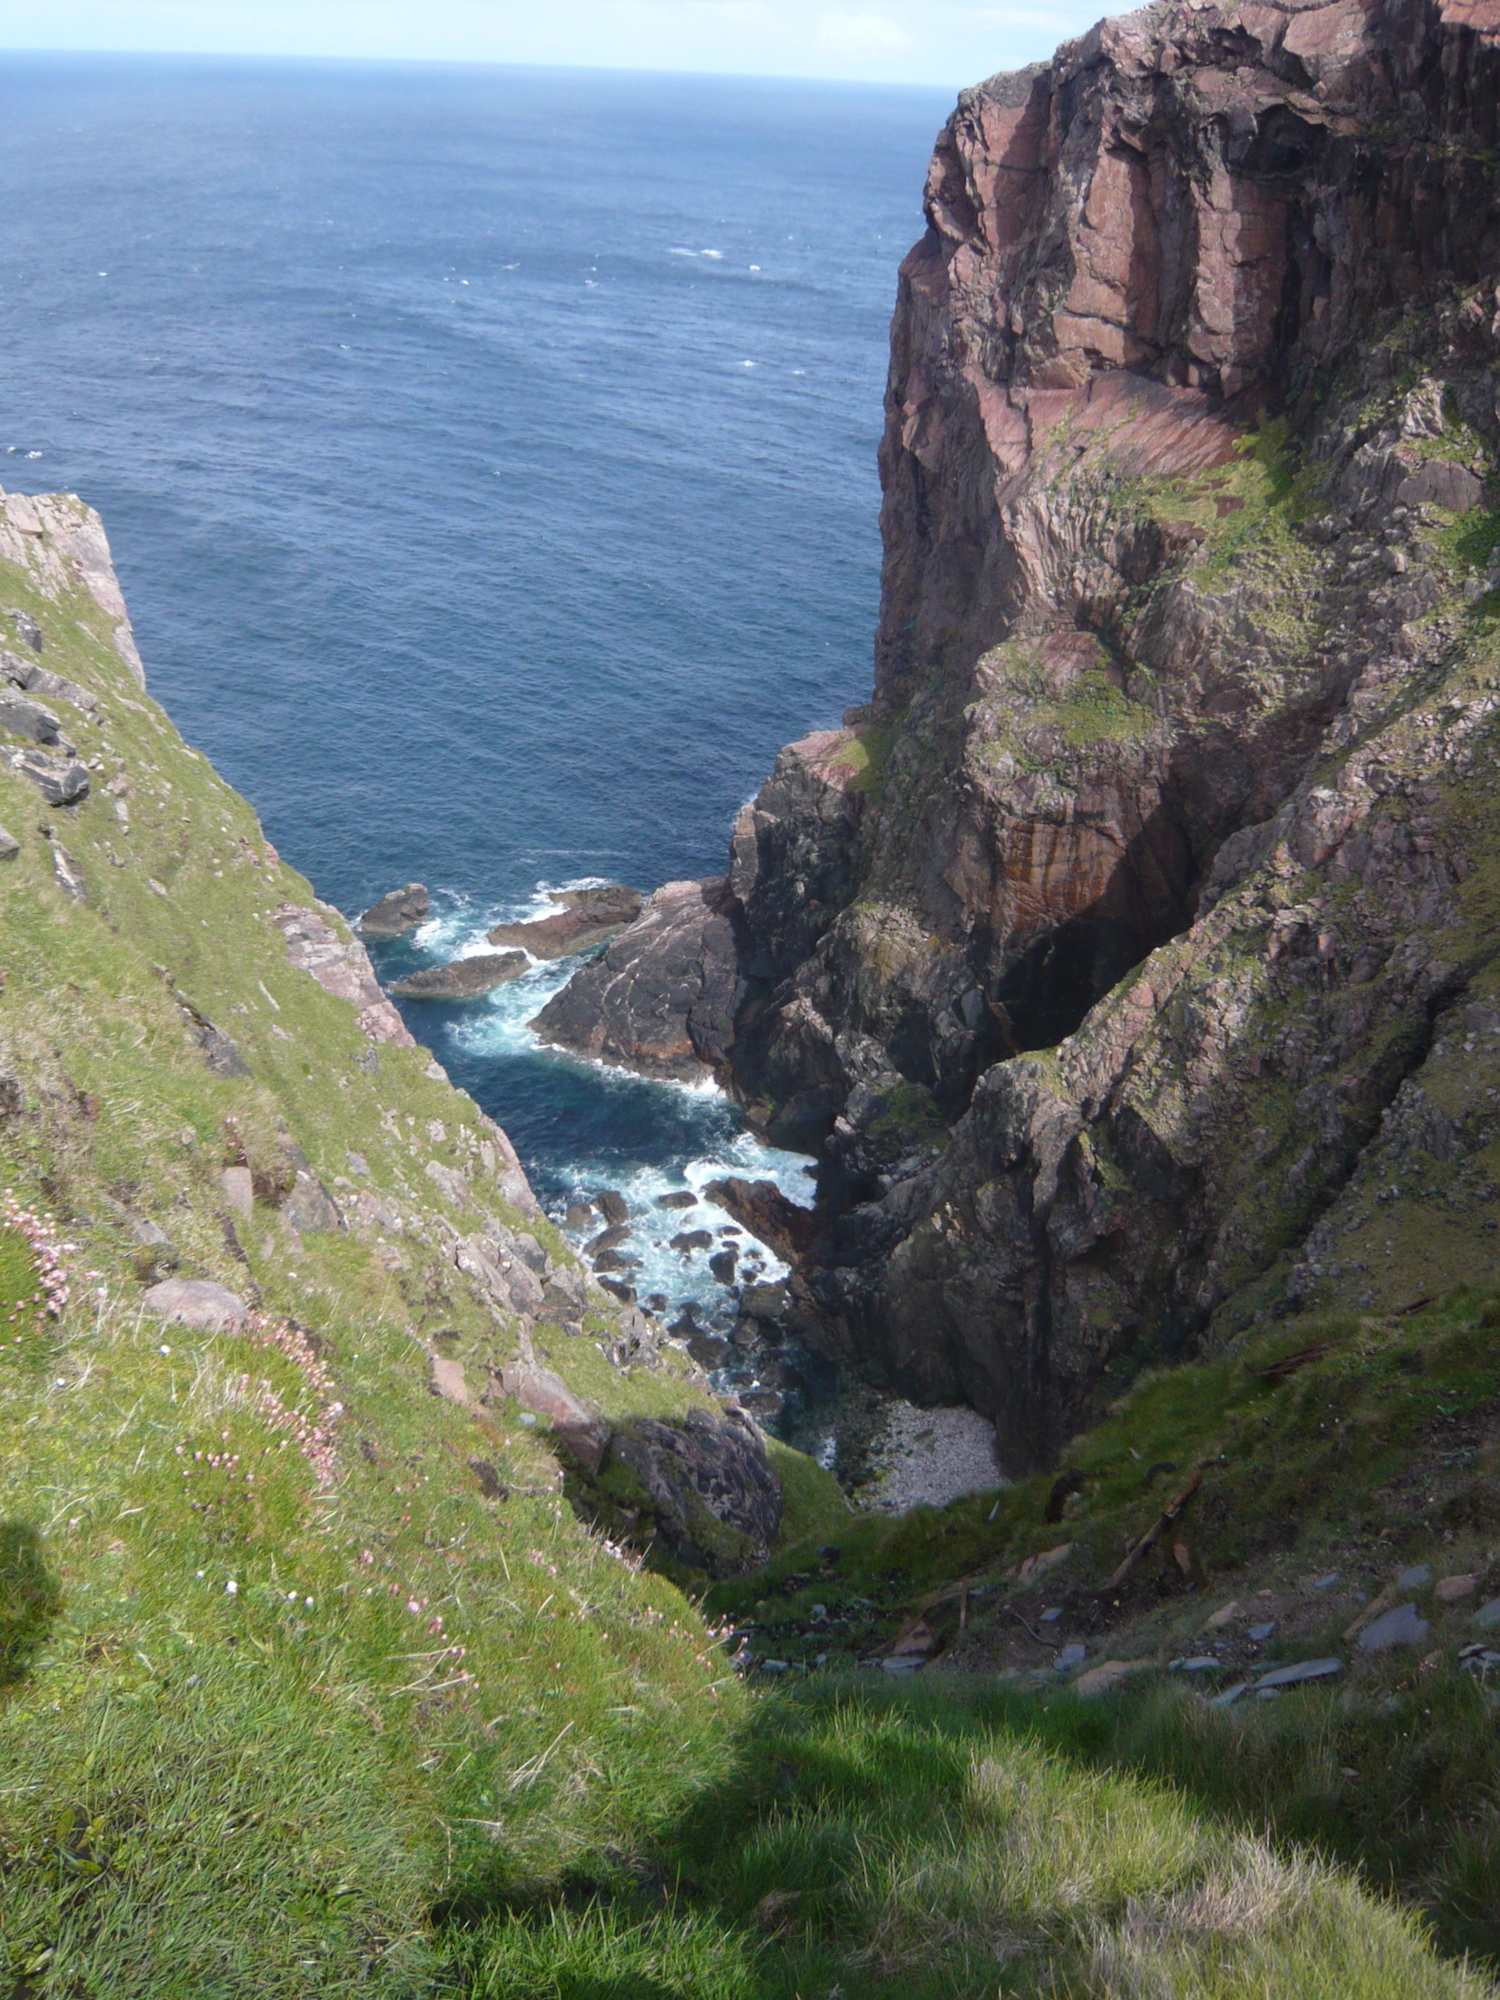 A view of the cliffs near the lighthouse. Some of the cliffs on Cape Wrath are the highest in Britain.